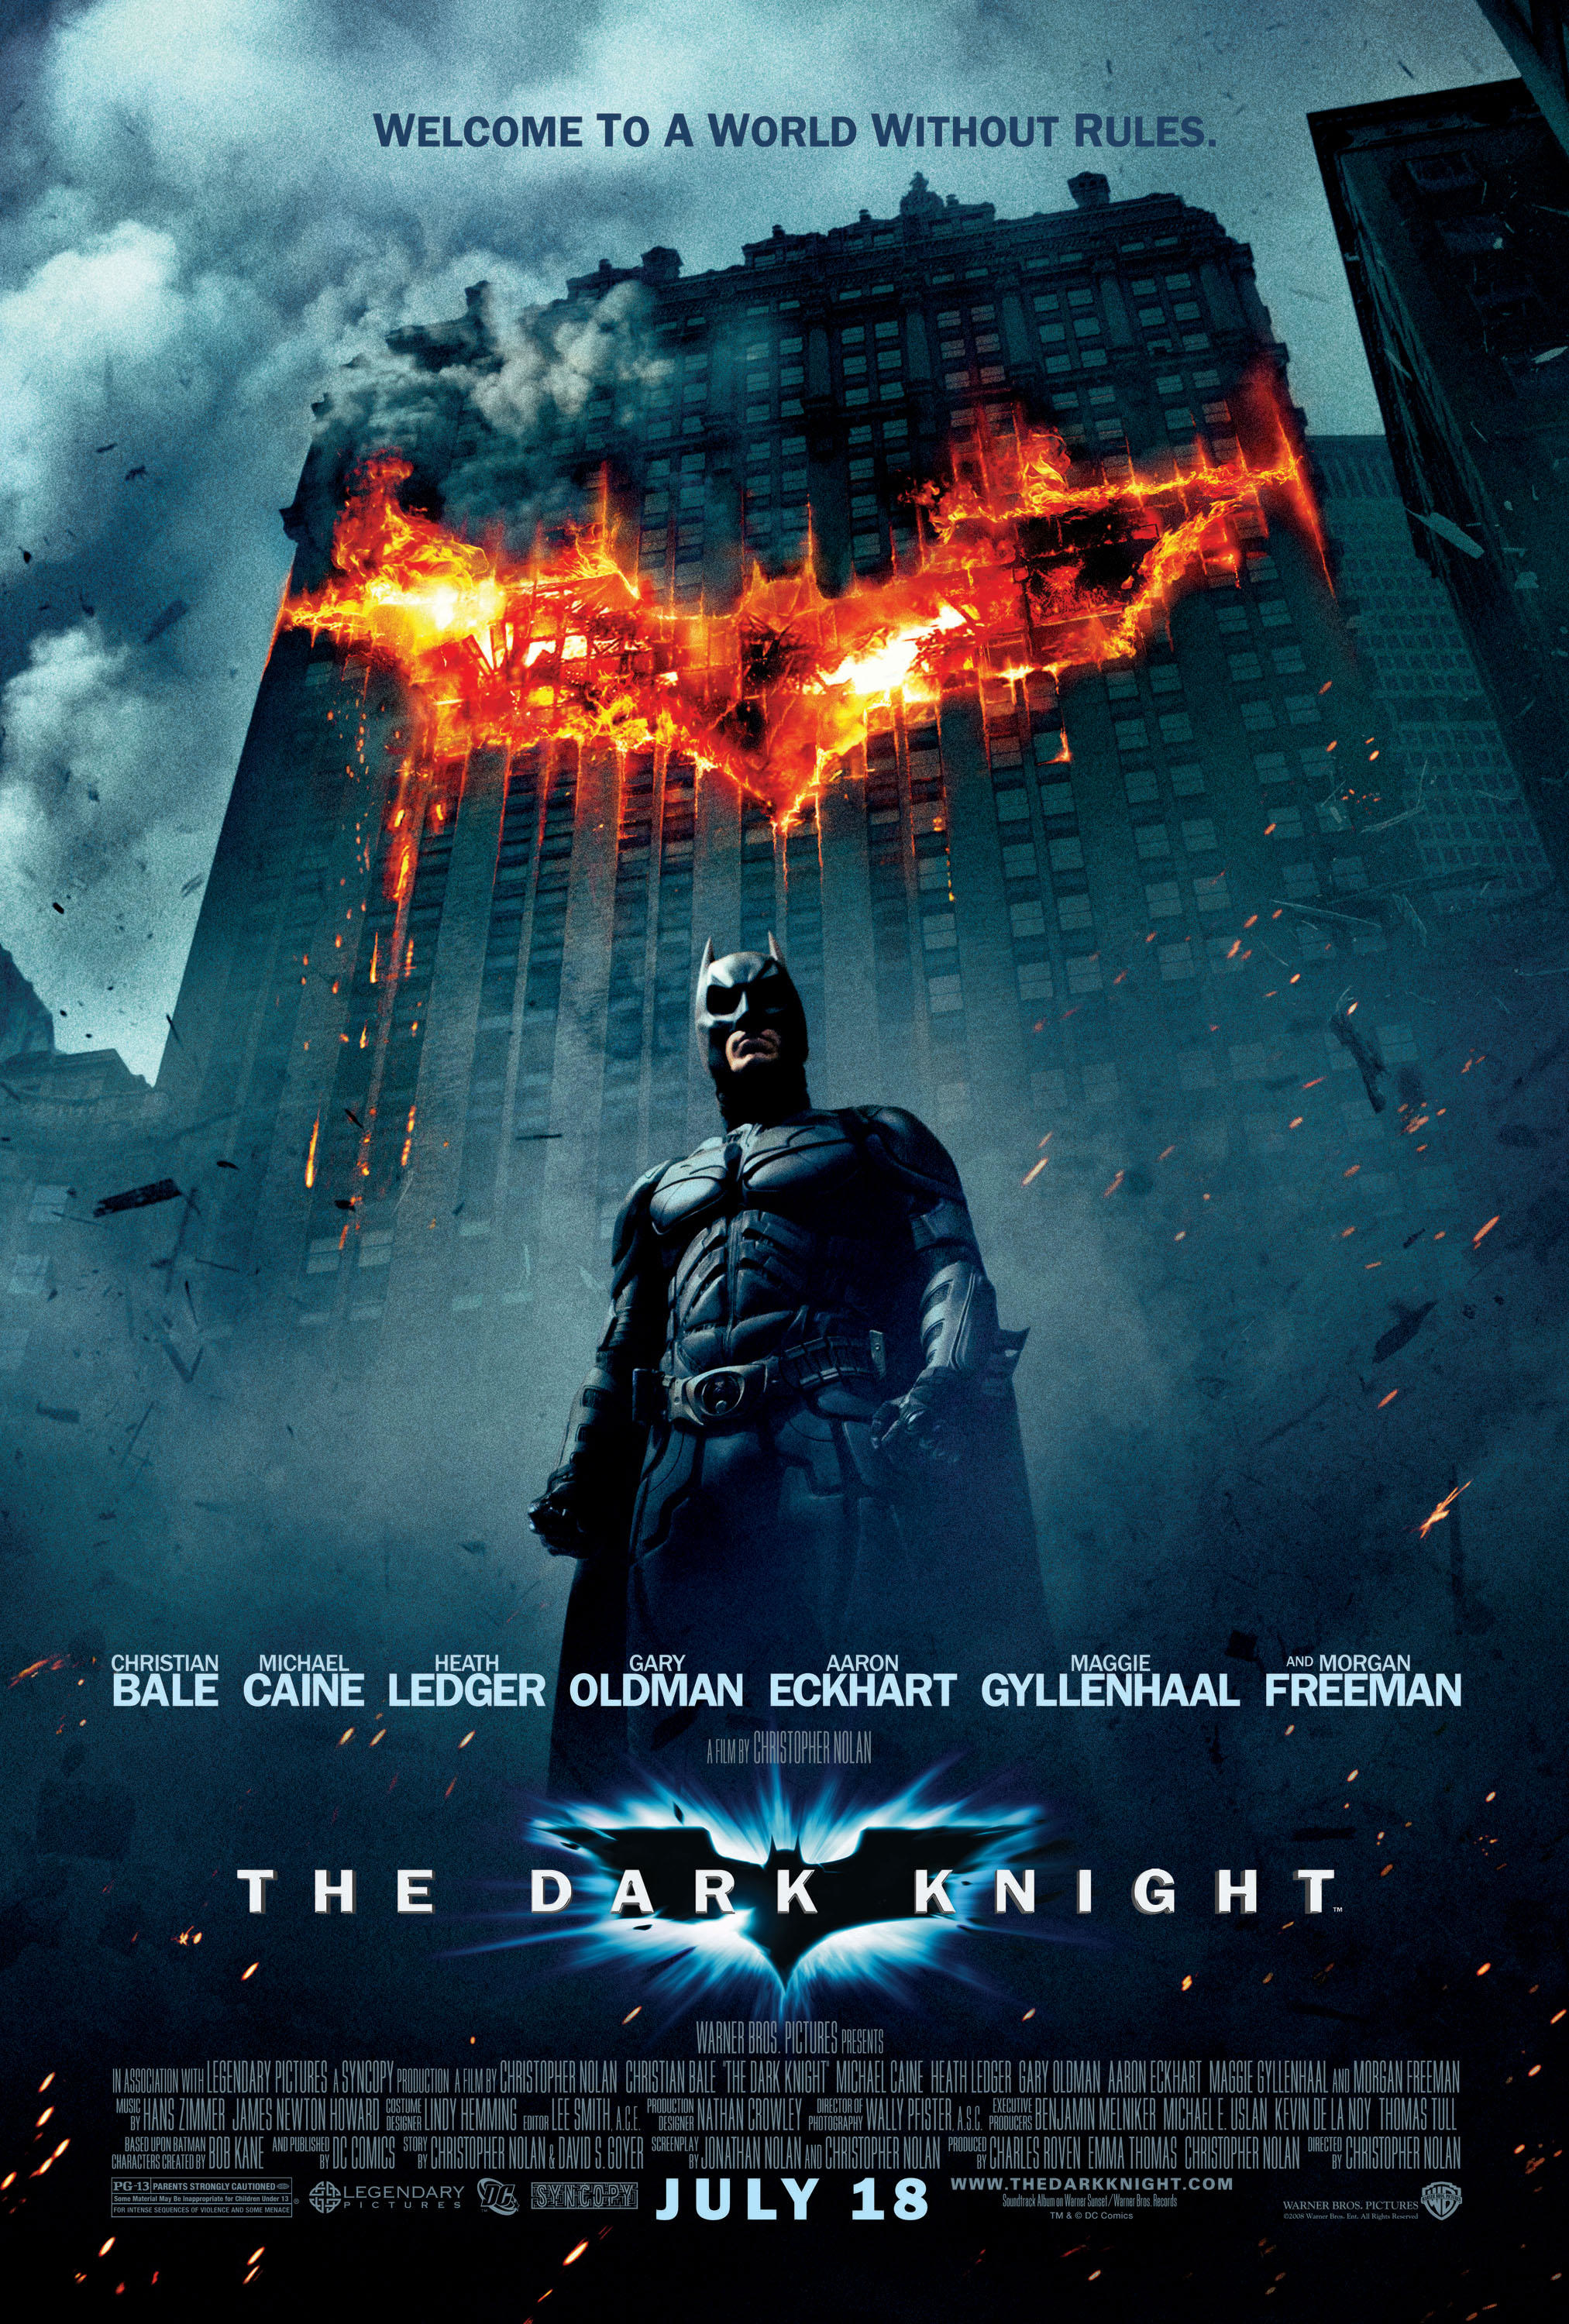 Batman stands in the center of the city on The Dark Knight movie poster.